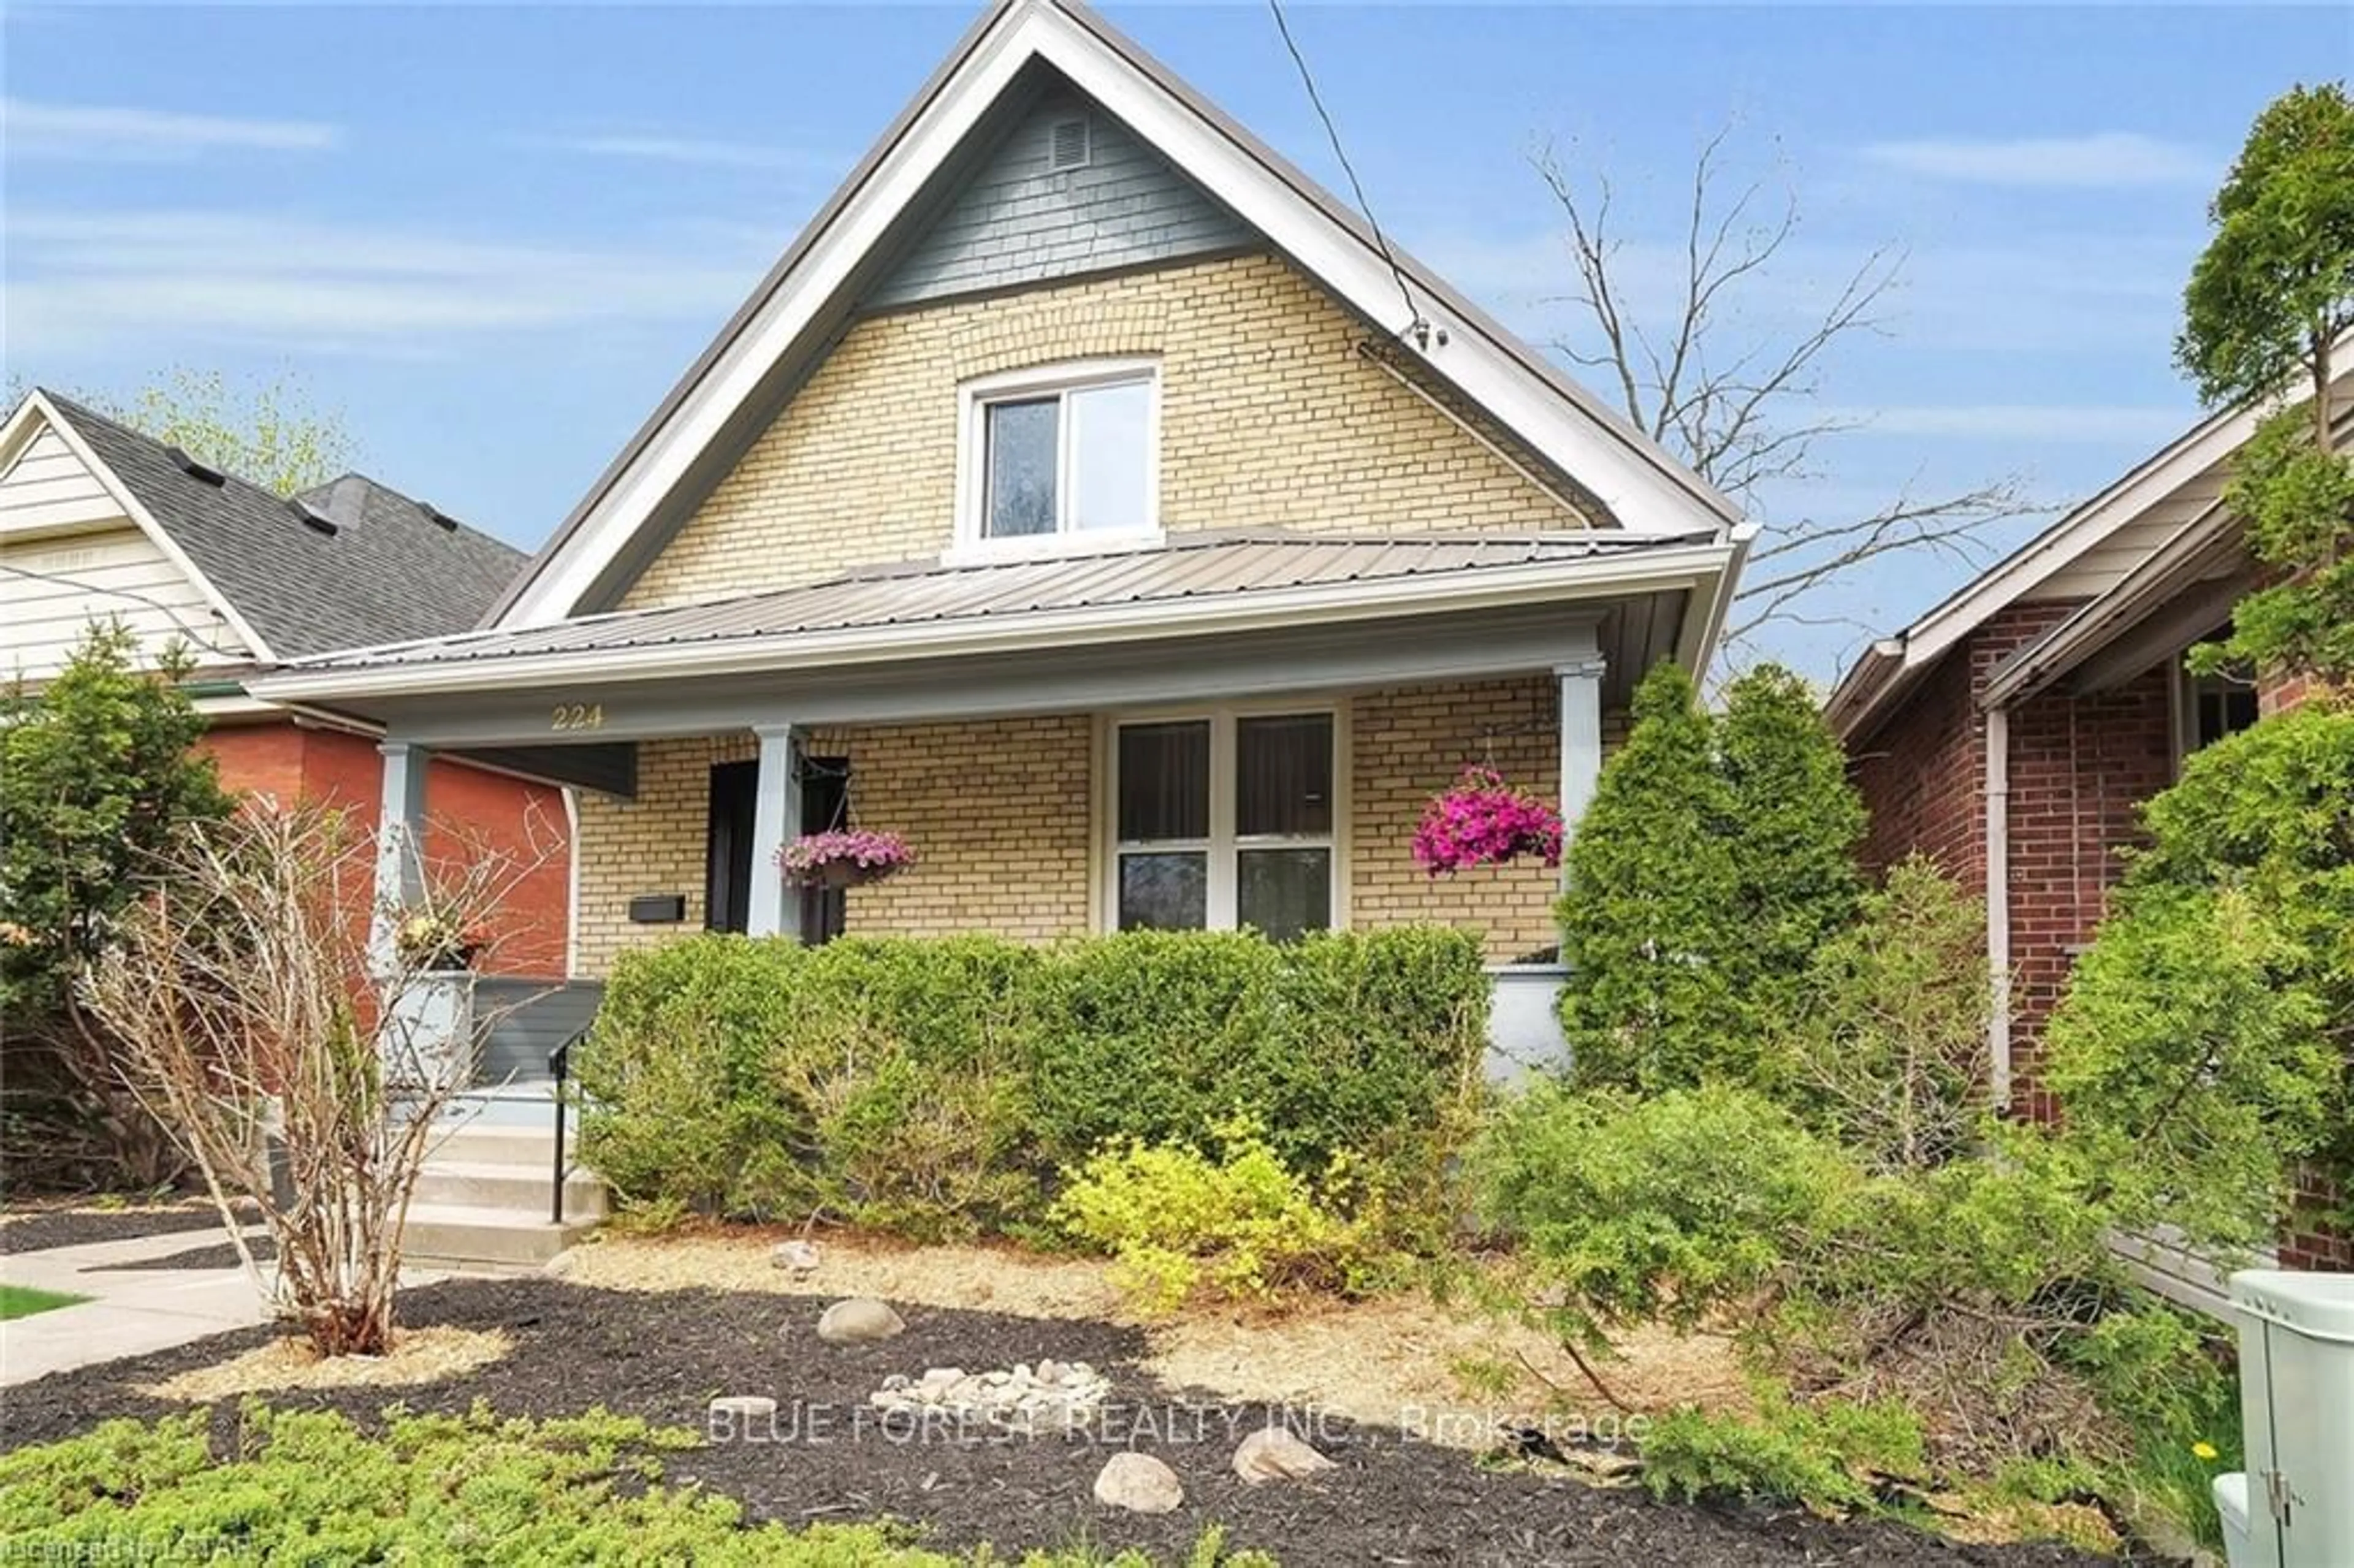 Frontside or backside of a home for 224 Raymond Ave, London Ontario N6A 2N1